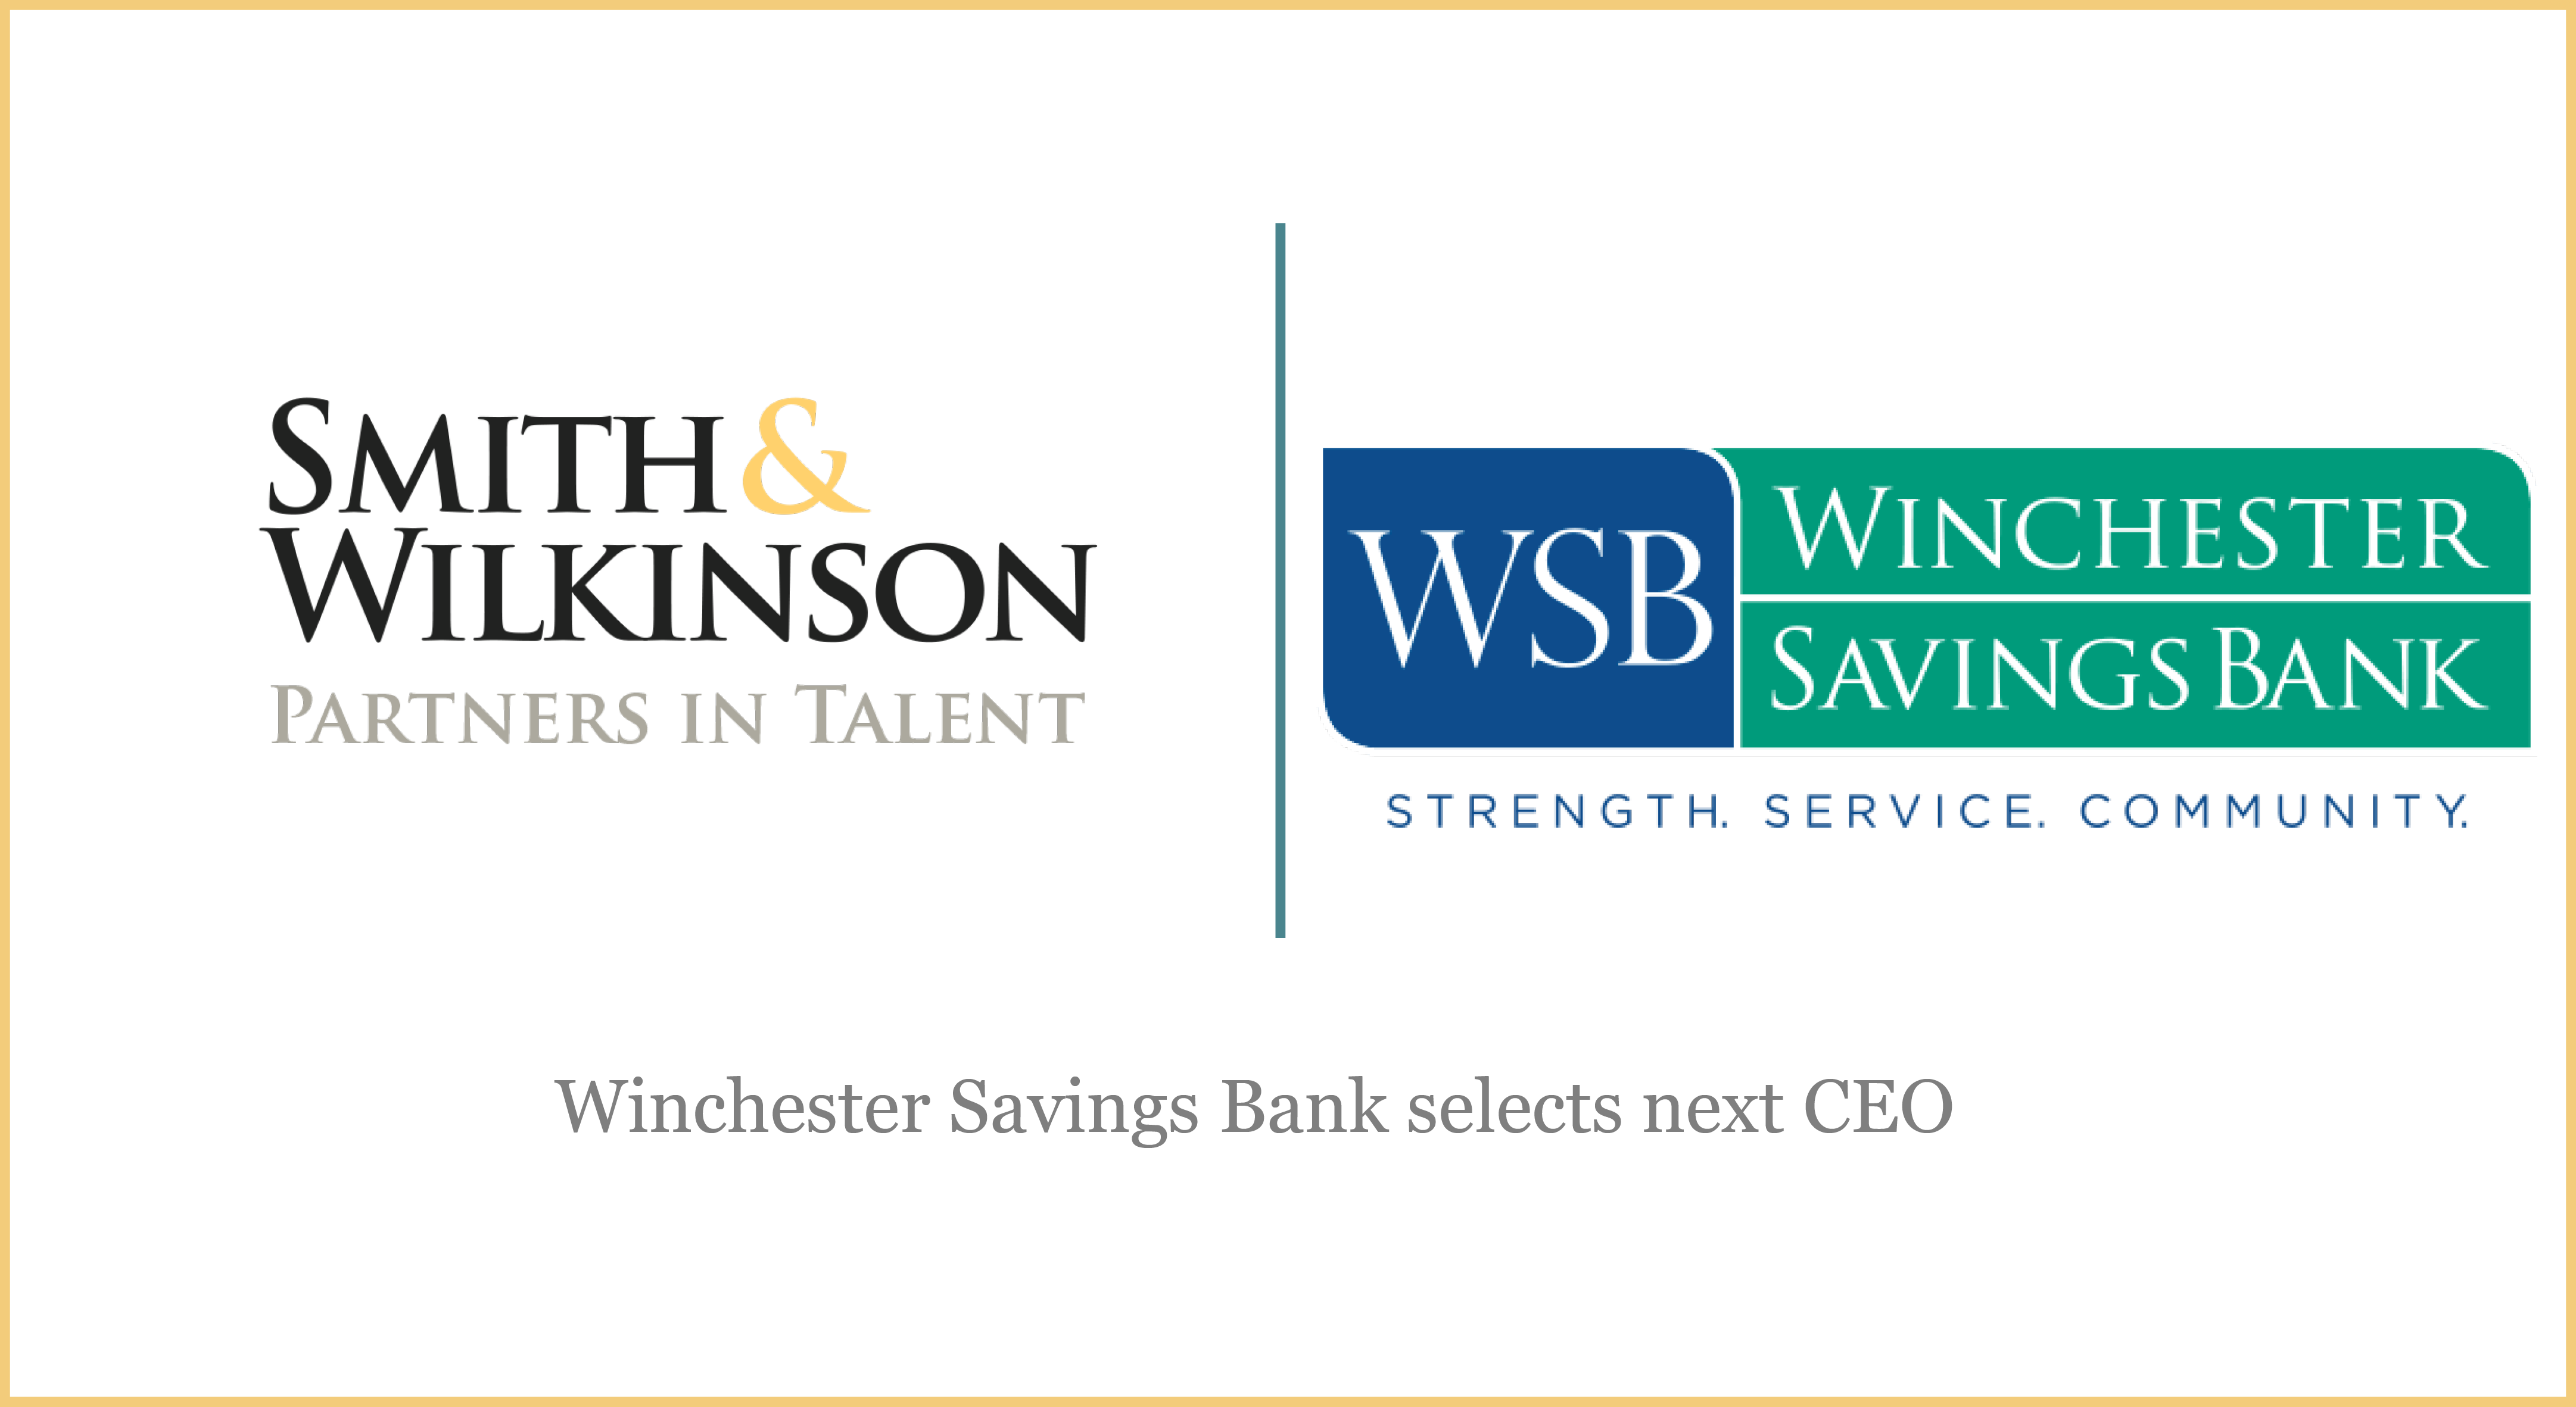 smith & wilkinson co-brand logo with winchester savings bank